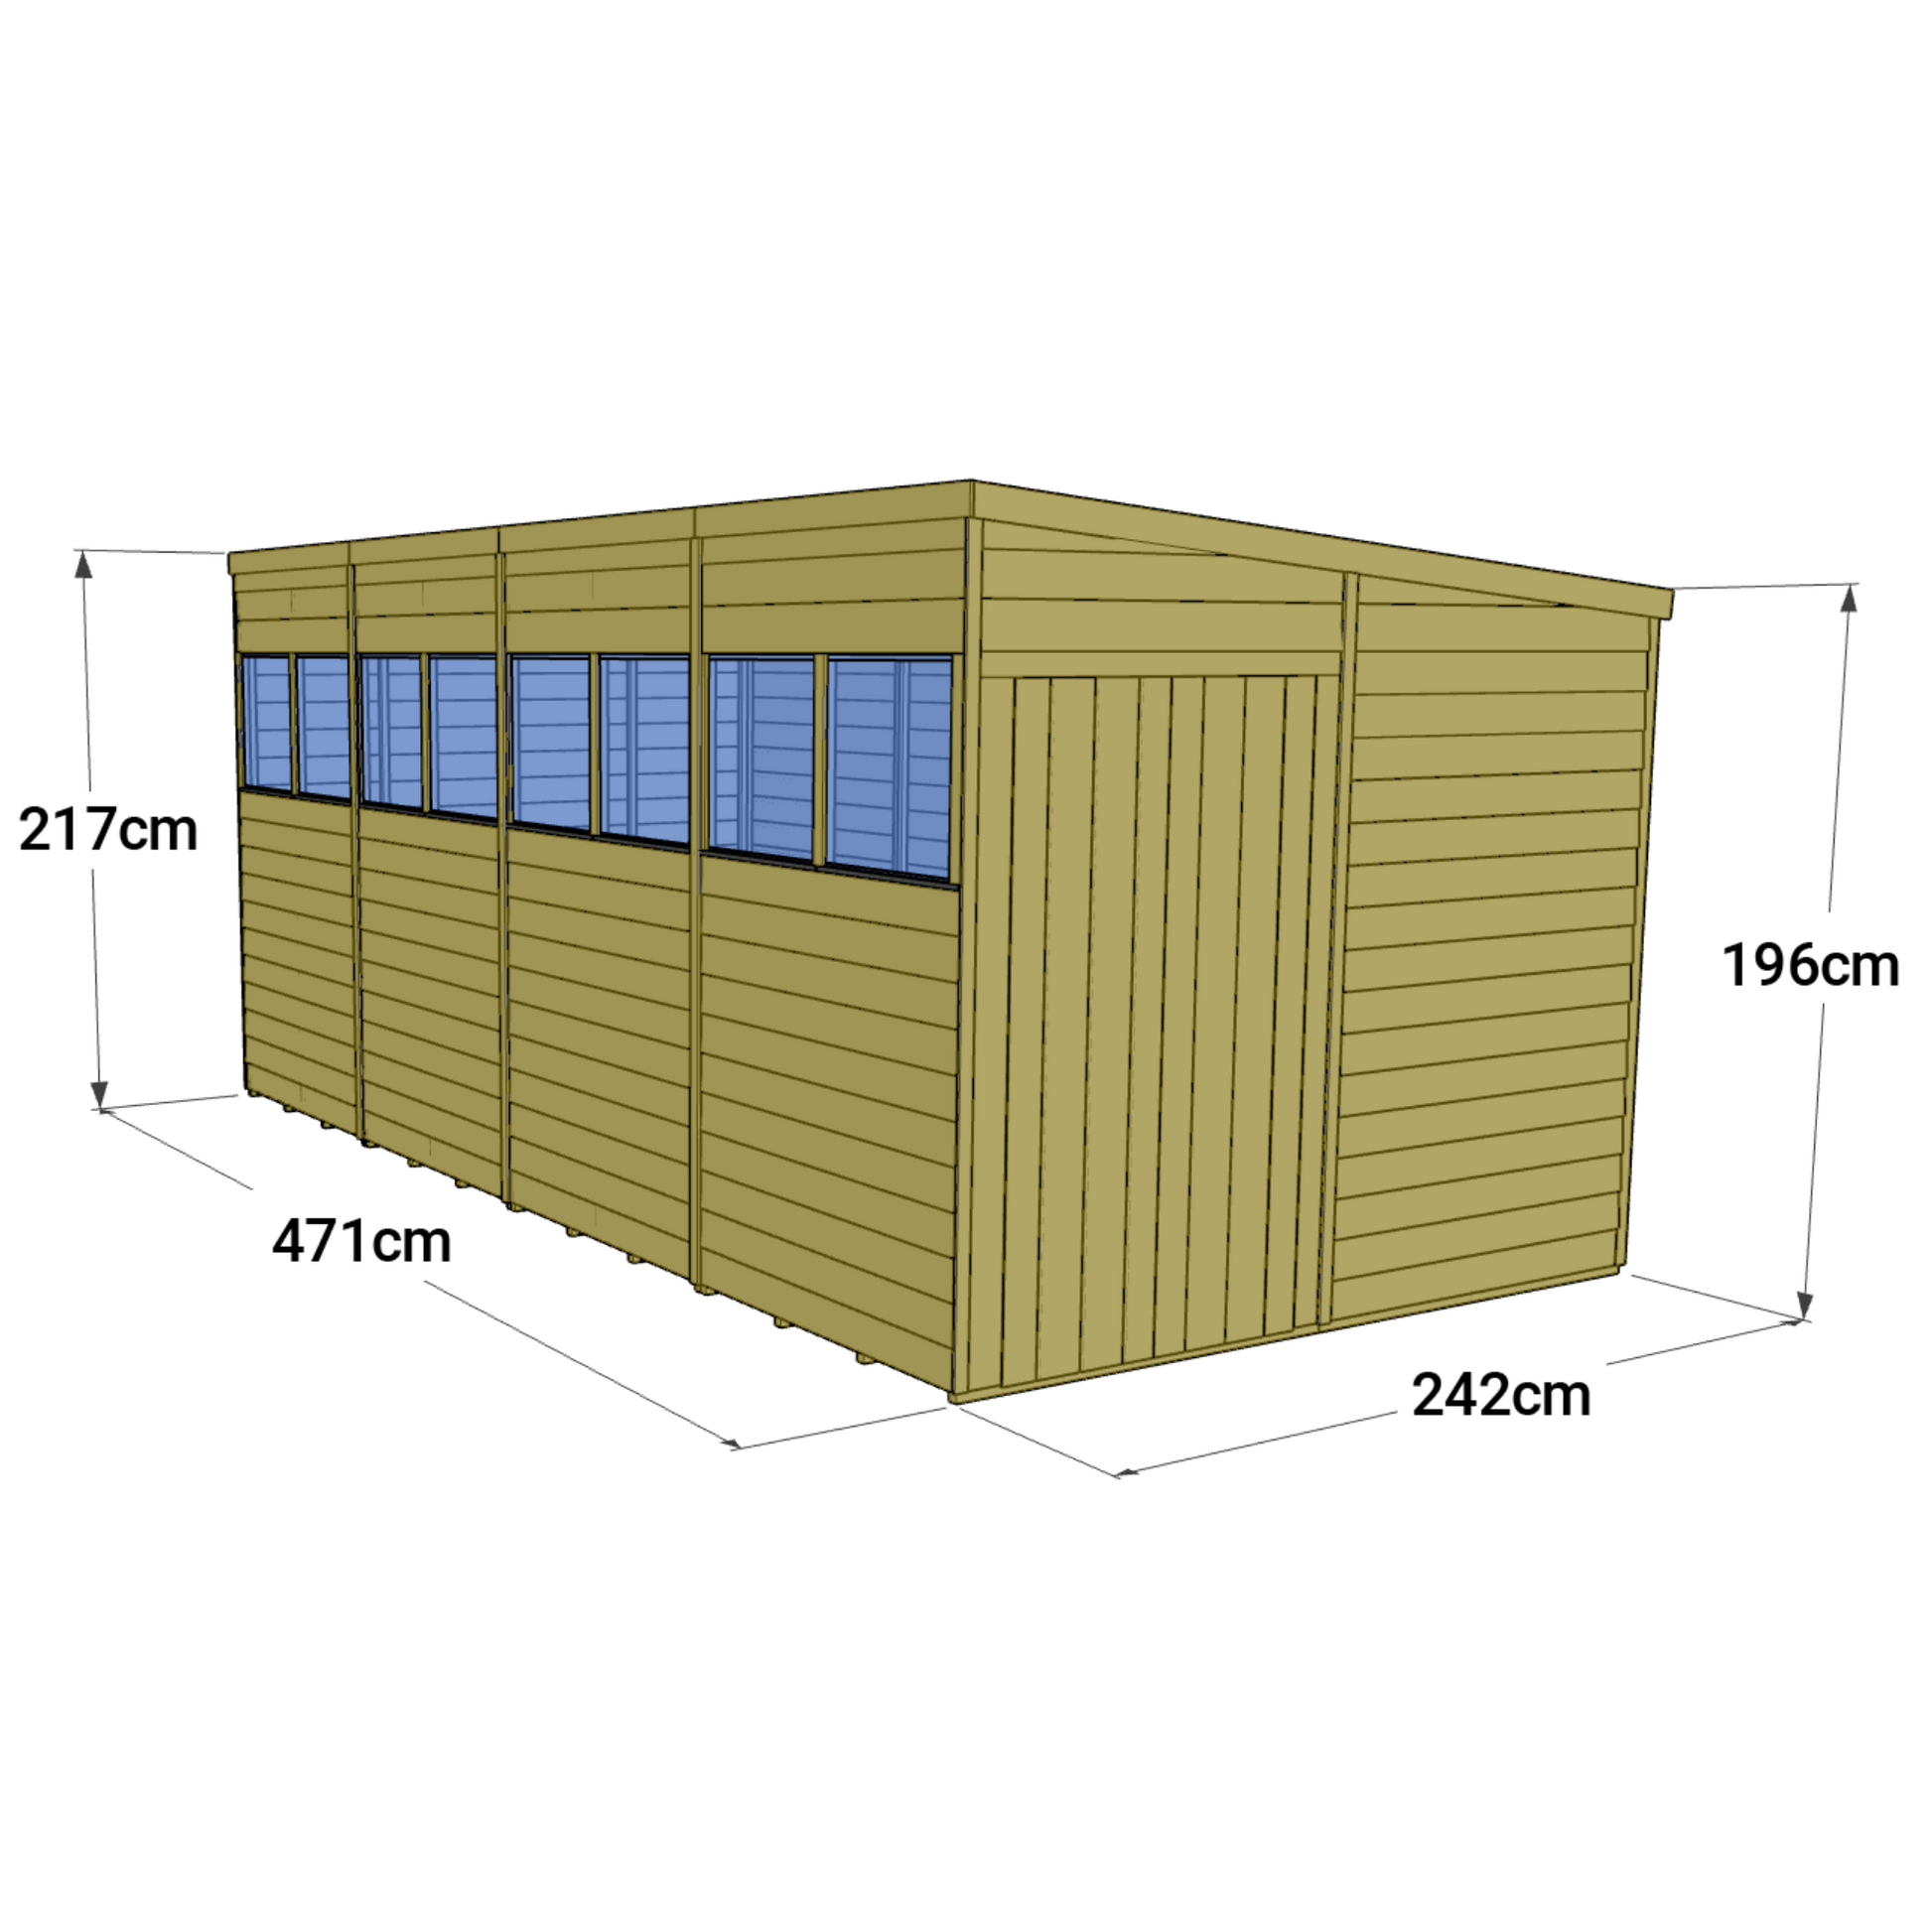 Store More 16 x 8 Tongue and Groove Pent Shed Windowed - Premium Garden